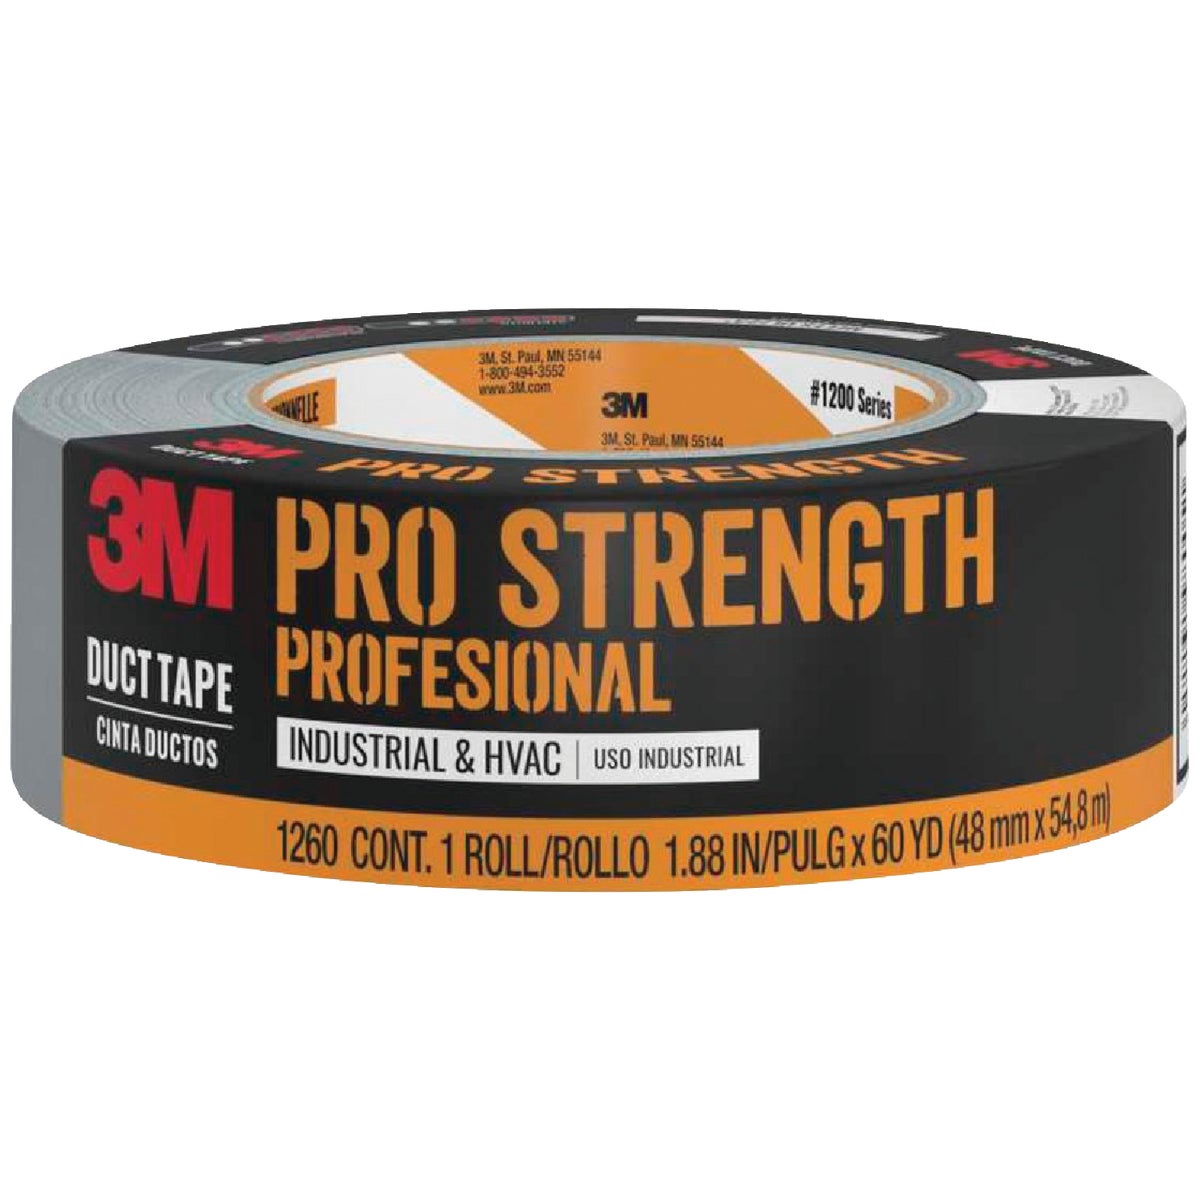 Scotch 1.88 In. x 60 Yd. Pro Strength Industrial & HVAC Duct Tape, Gray